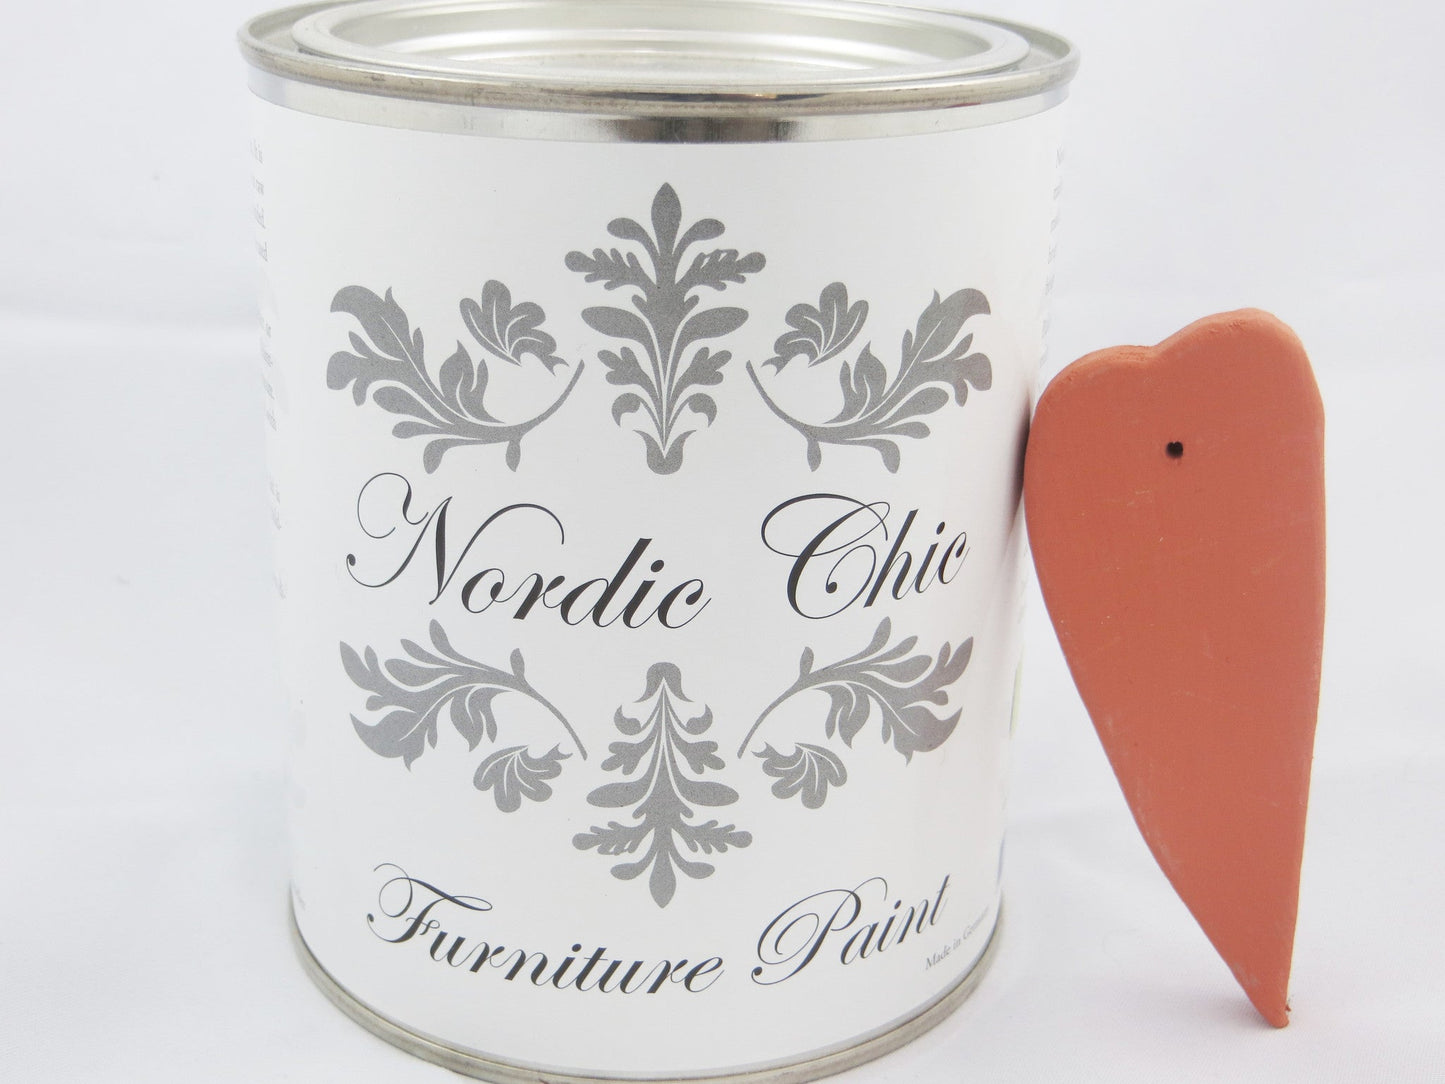 Nordic Chic Furniture Paint - Rusty - Nordic Chic®